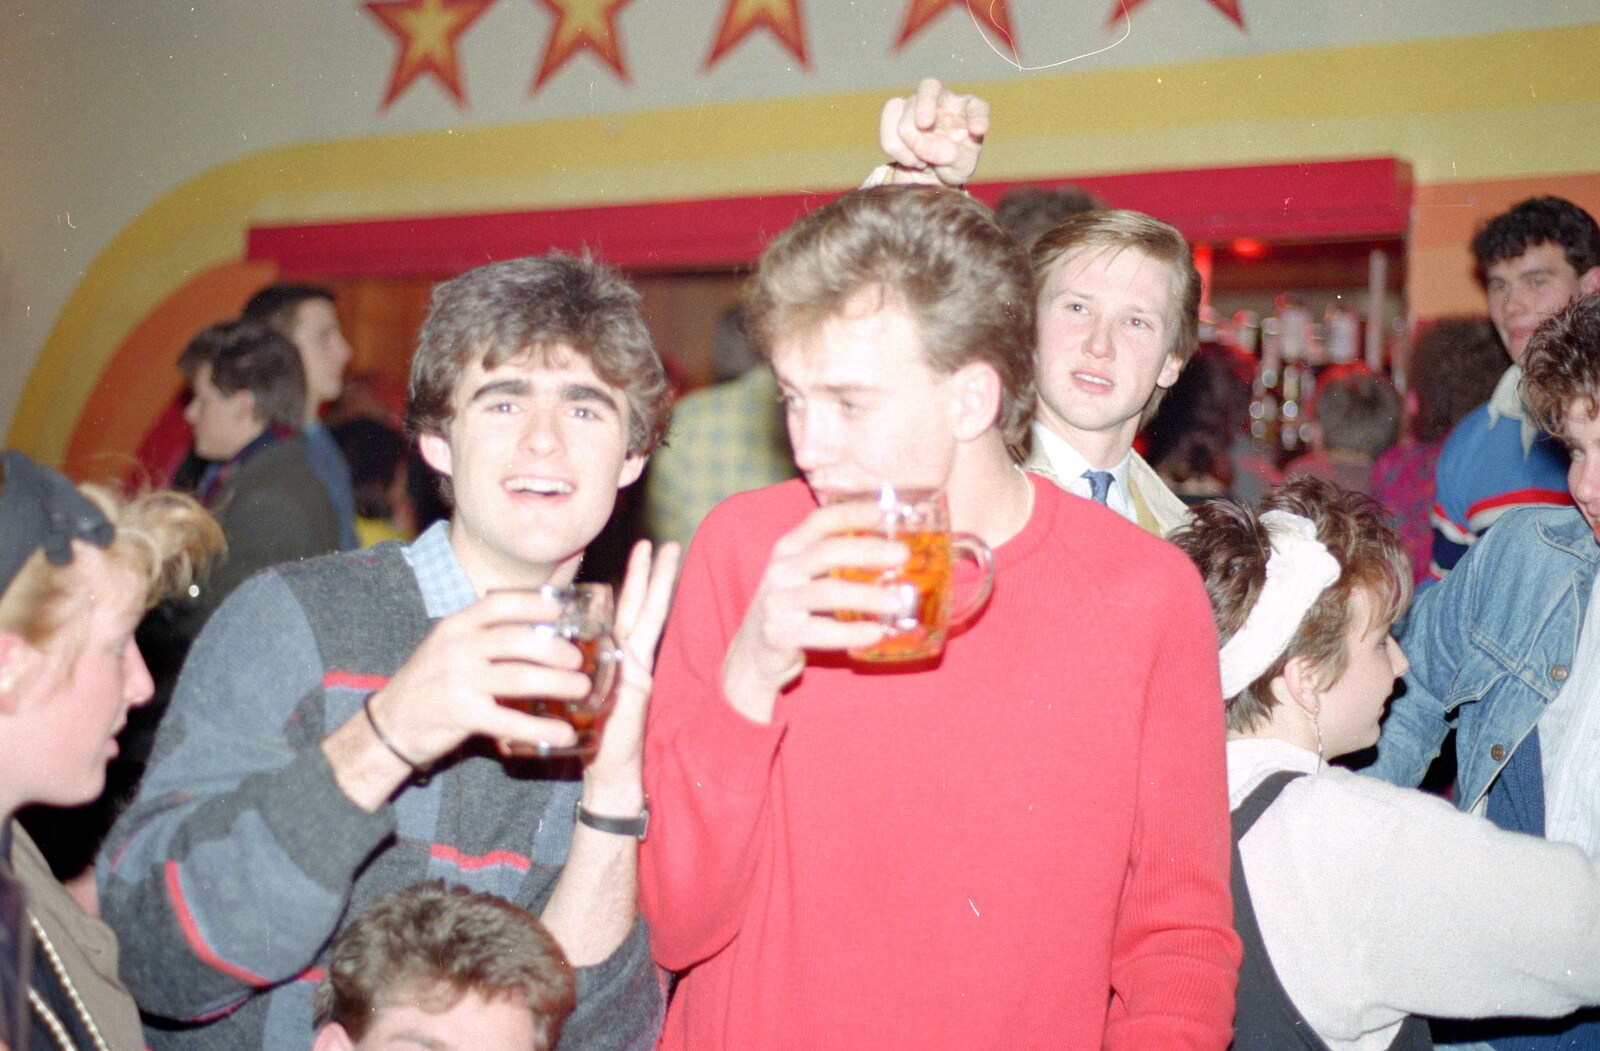 Mugs of beer from Uni: Music Nights and the RAG Ball, Plymouth, Devon - 18th February 1986